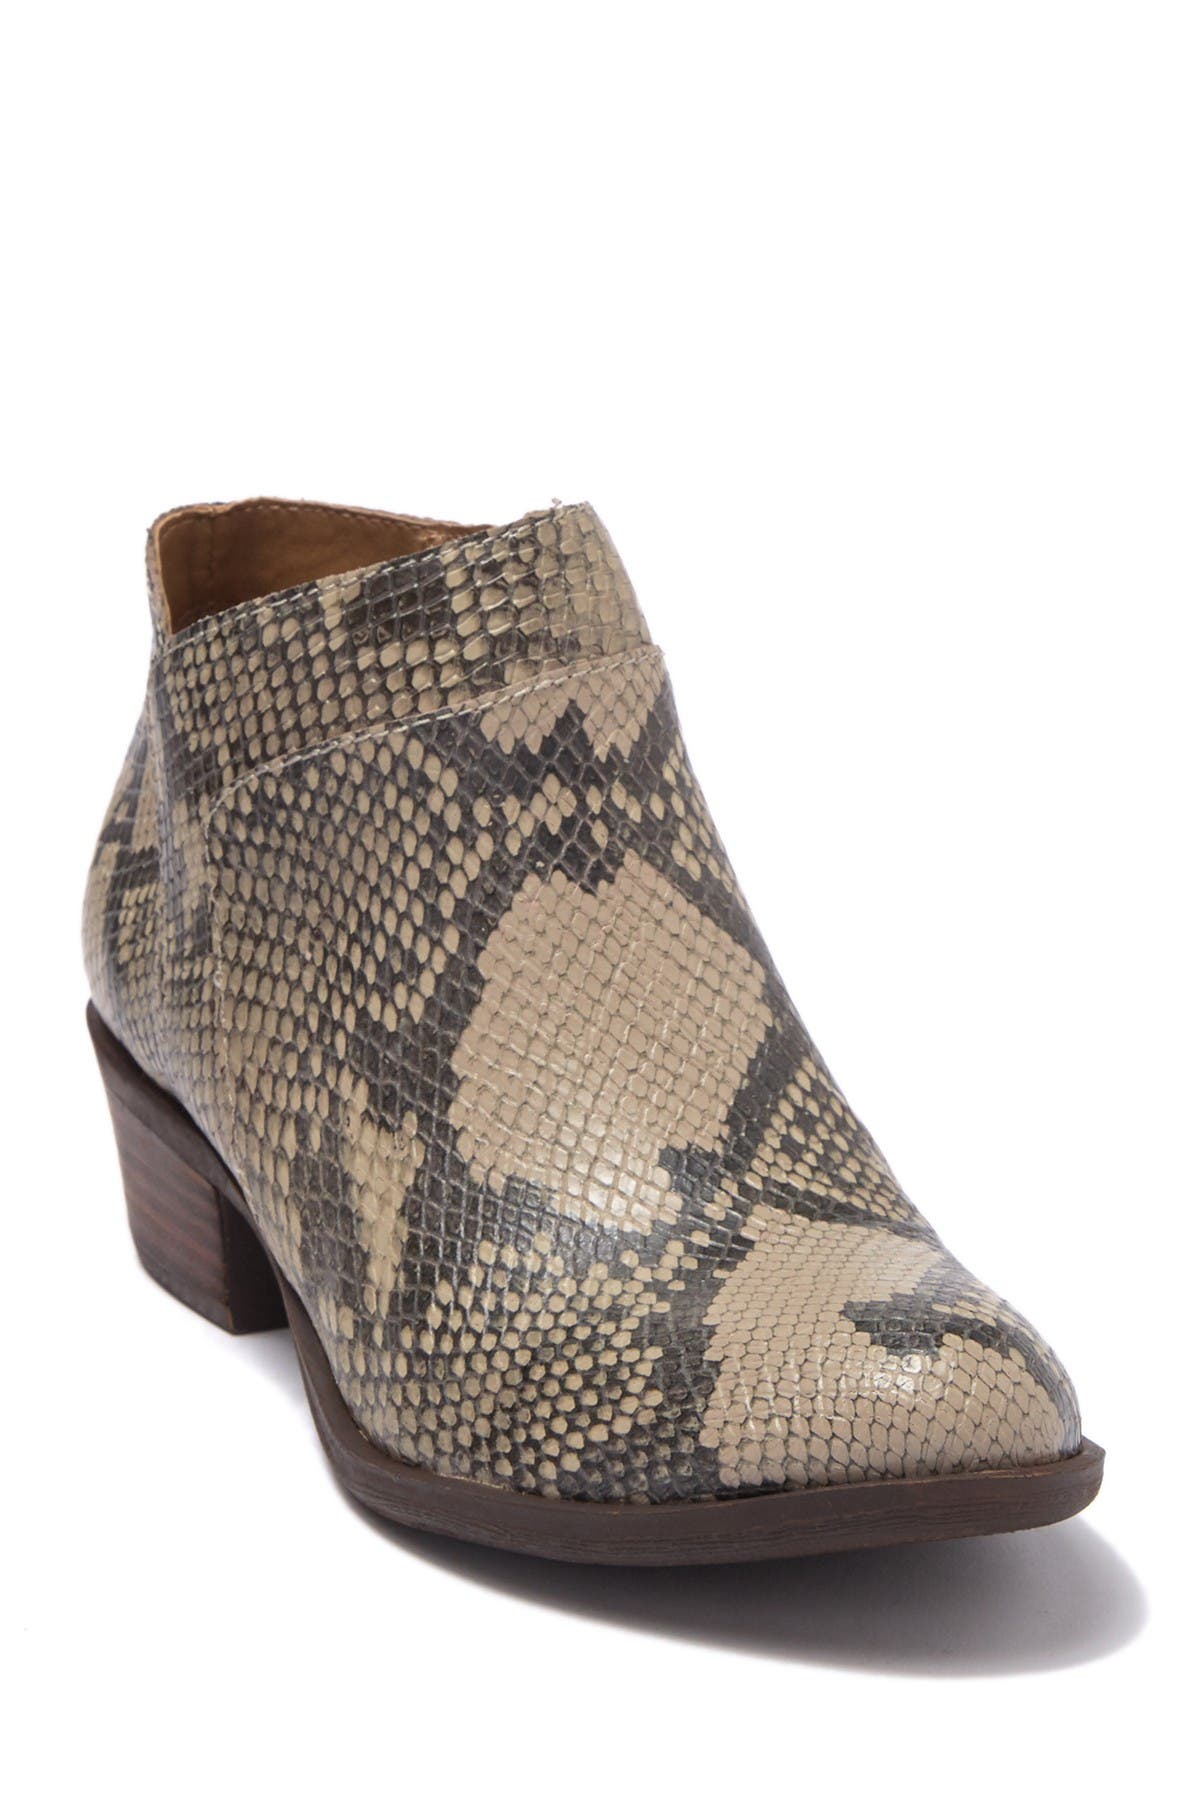 lucky brand brintly bootie